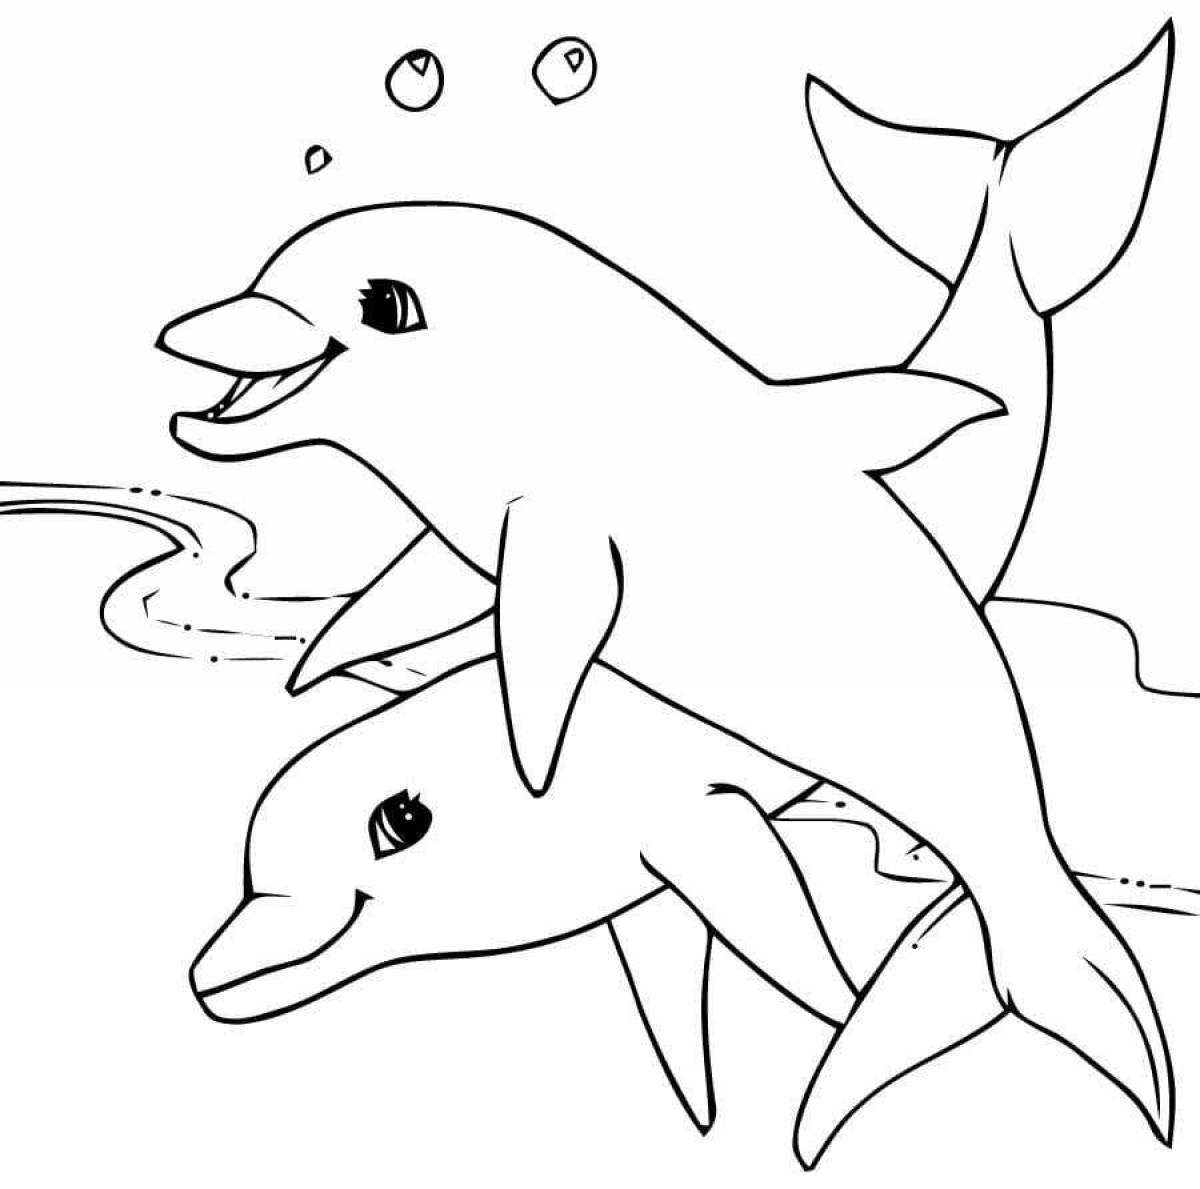 Coloring pages animals for children 10 years old